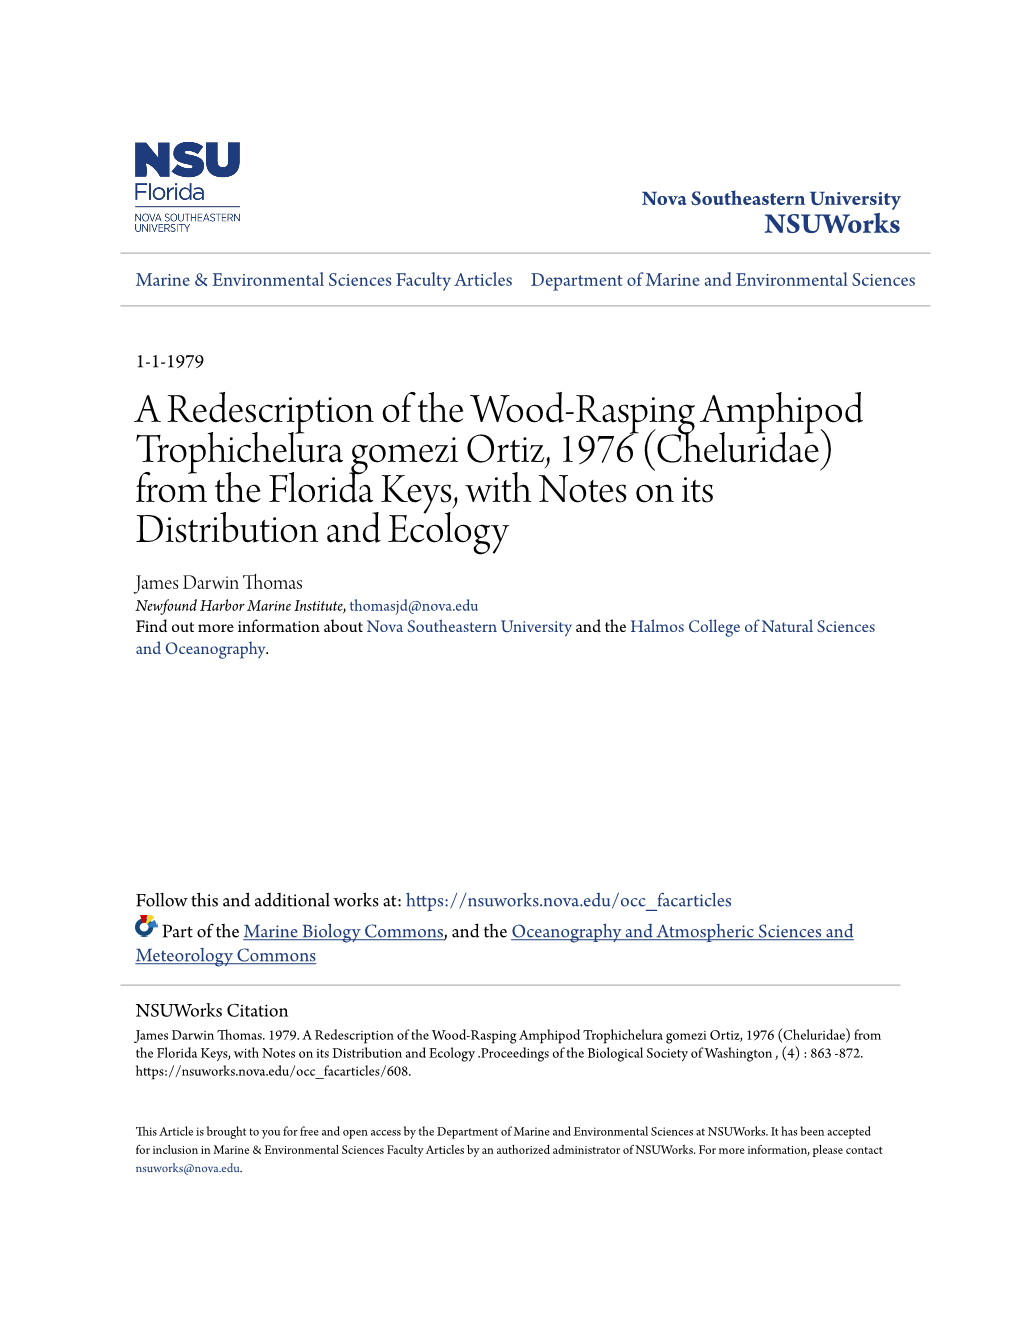 A Redescription of the Wood-Rasping Amphipod